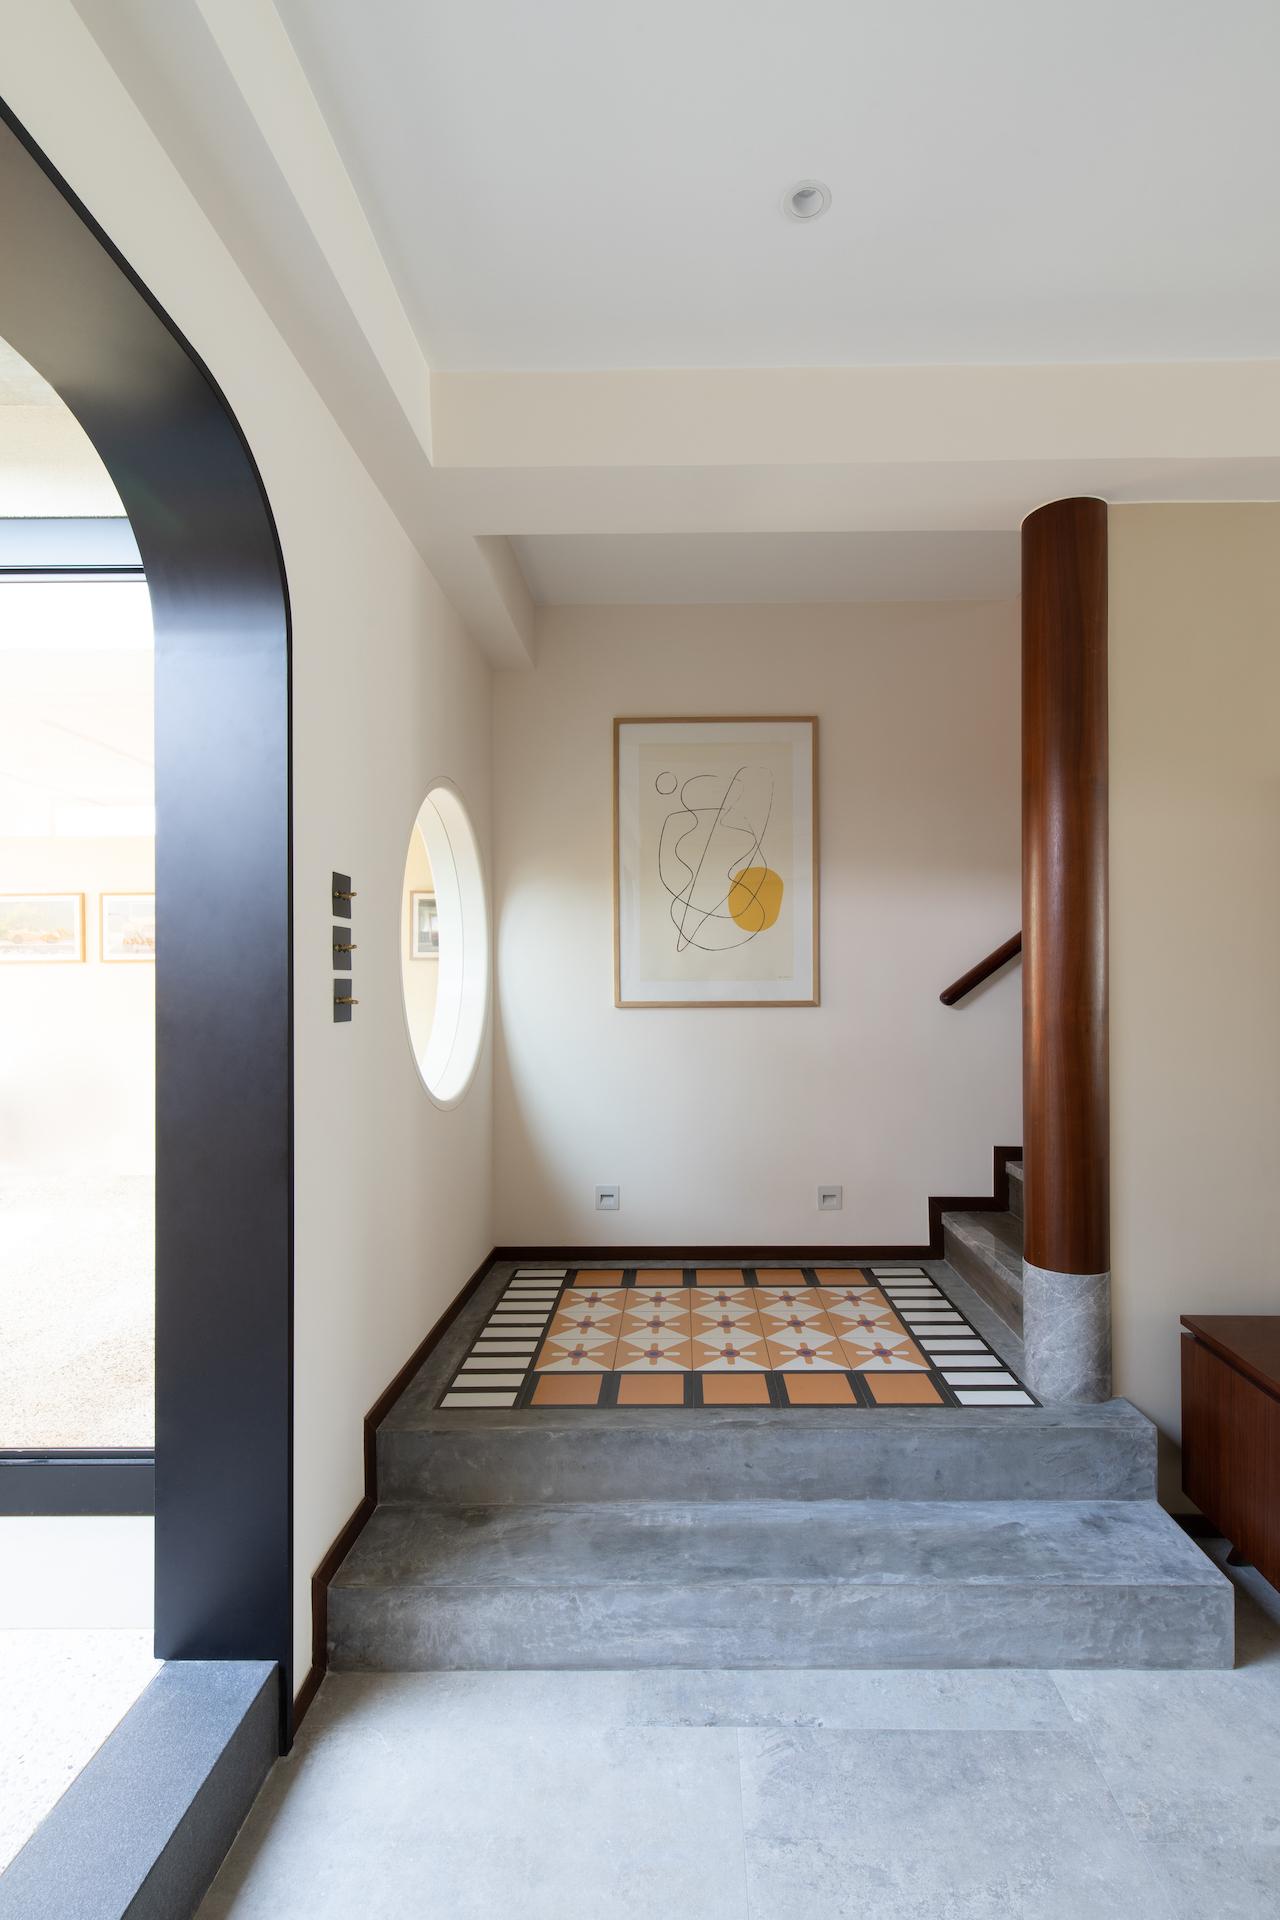 This 3,100-sq.ft. Hong Lok Yuen Residence is the Resort-Style Home of a Young Family